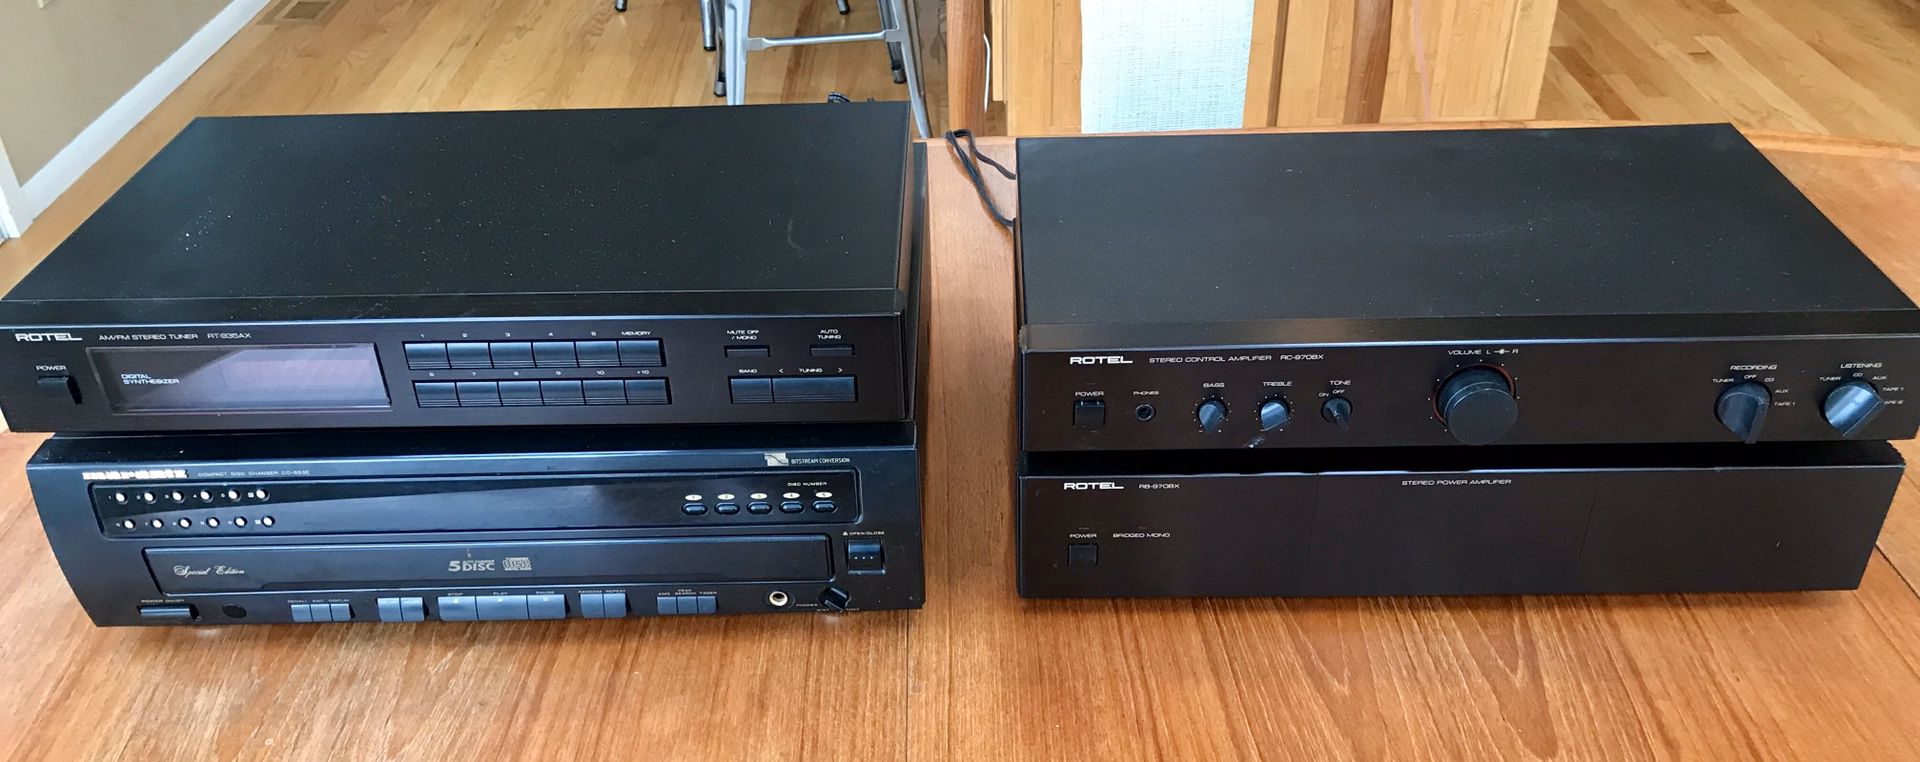 Old, top of the line stereo (Rotel and Marantz)